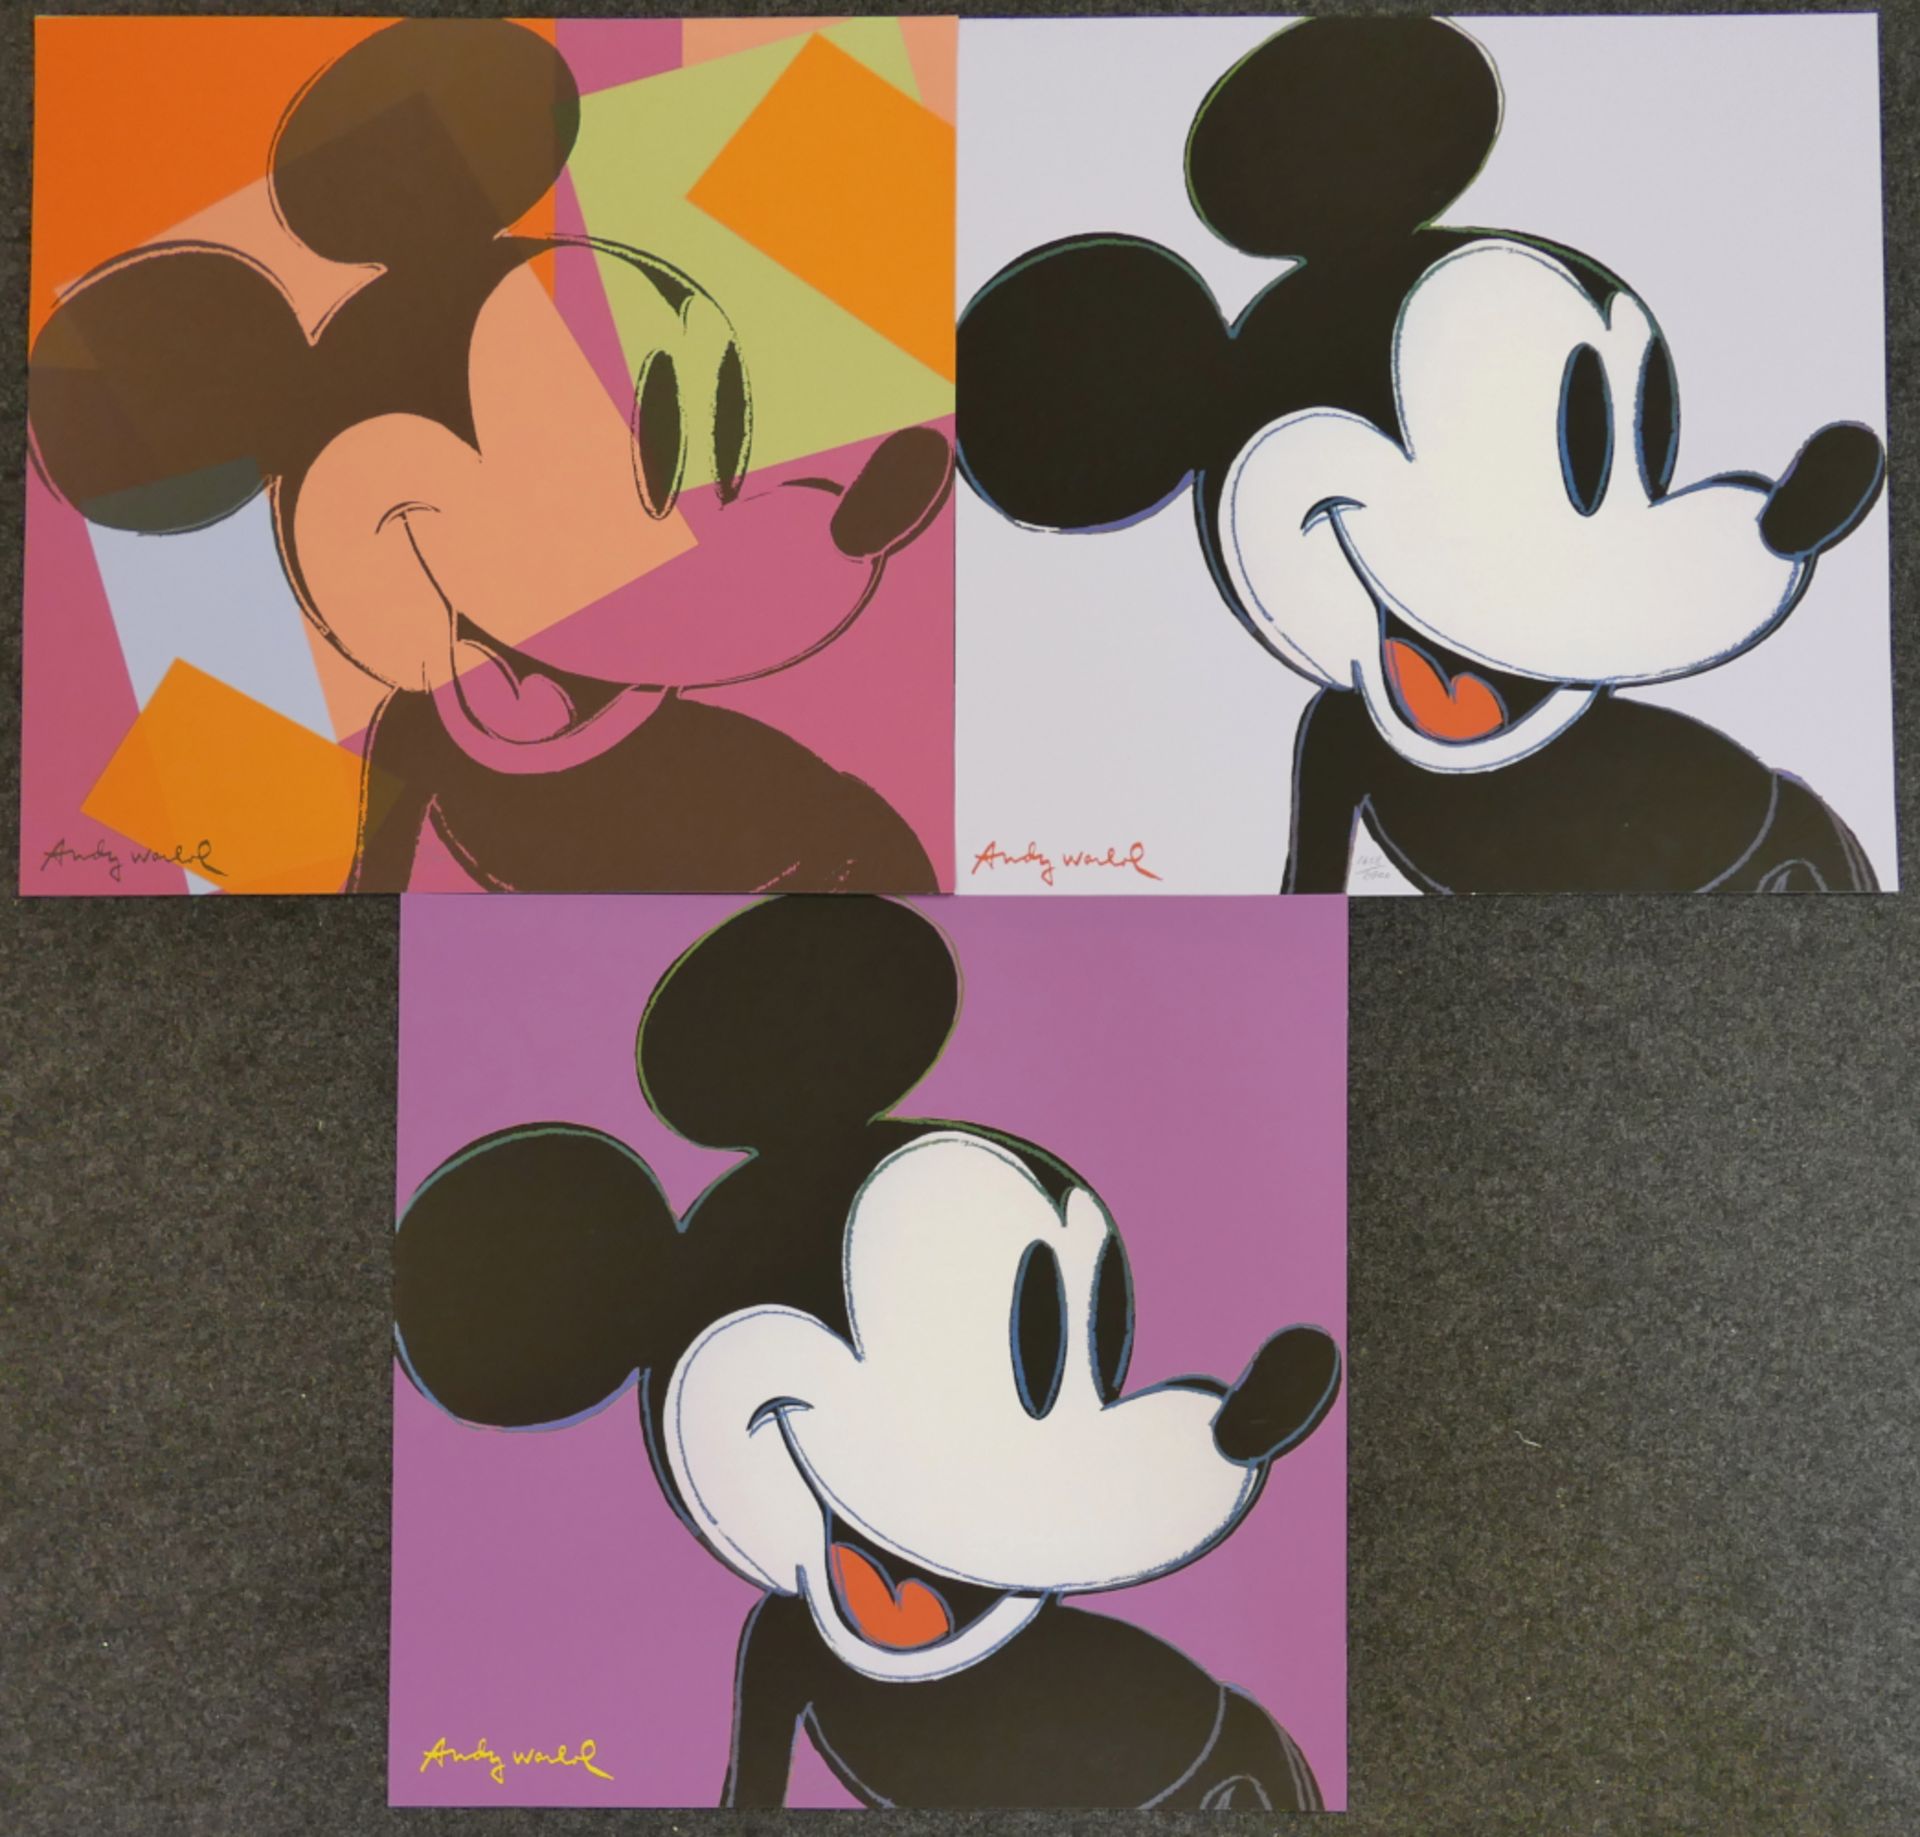 6 Offsetlithografien nach Andy WARHOL (wohl 1928 Pittsburgh-1987 New York): 3x "Micky Mouse", 3x "Ma